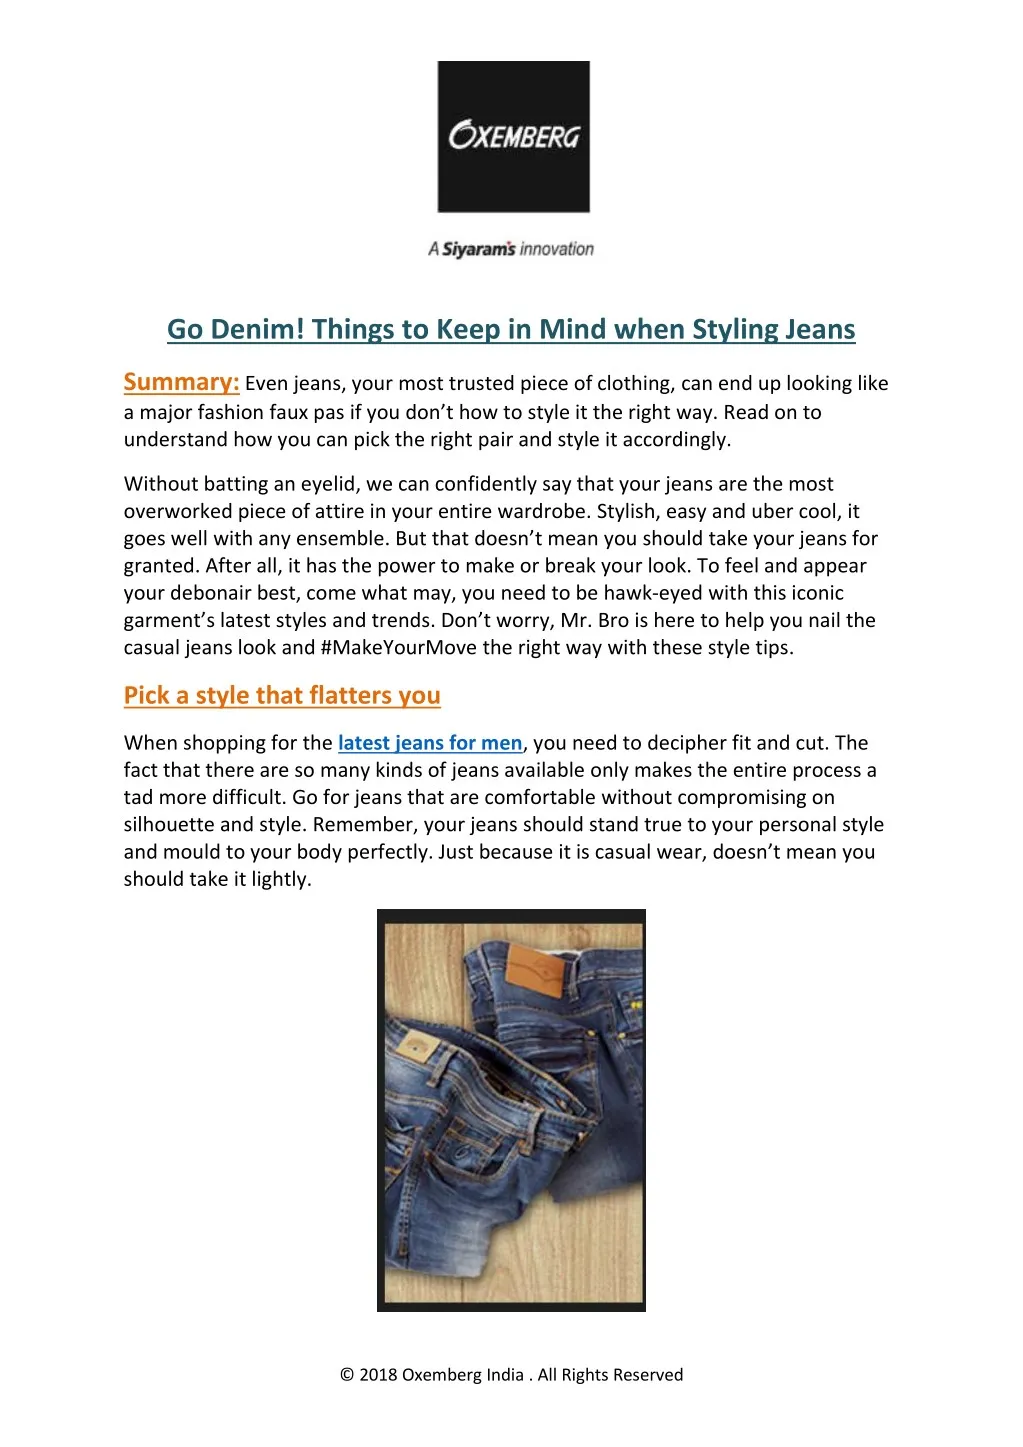 go denim things to keep in mind when styling jeans